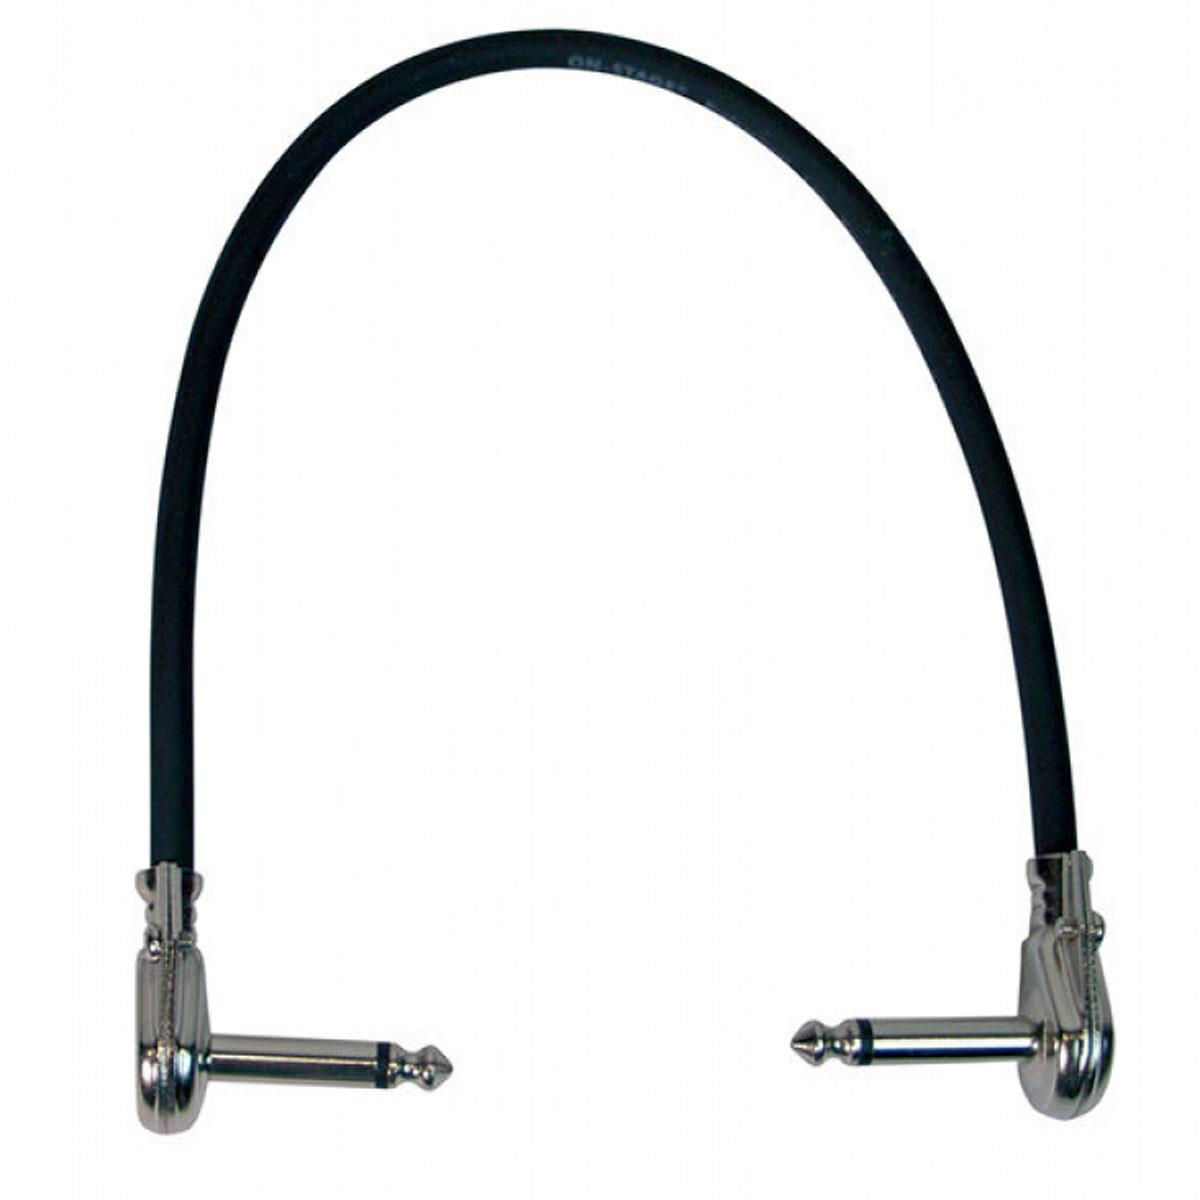 Image of On-Stage 1' Patch Cable with Pancake Connectors